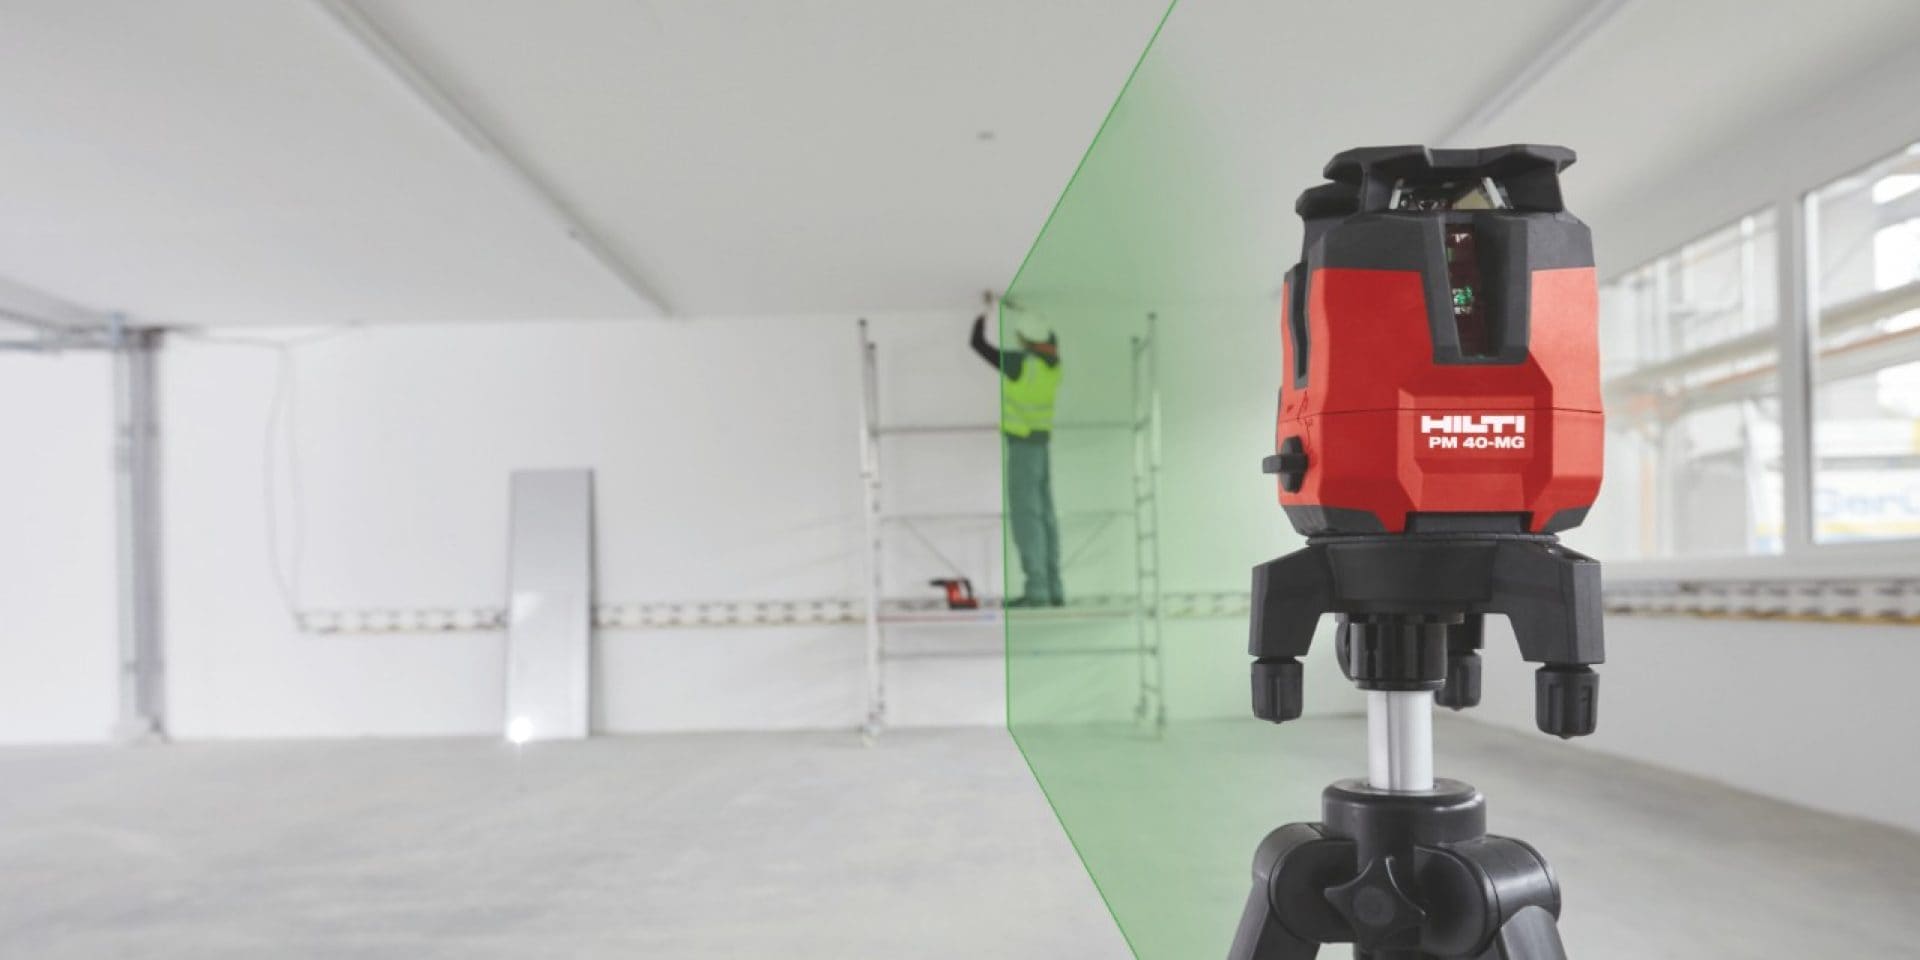 Hilti PM 40-MG multi-line laser with latest green beam technology